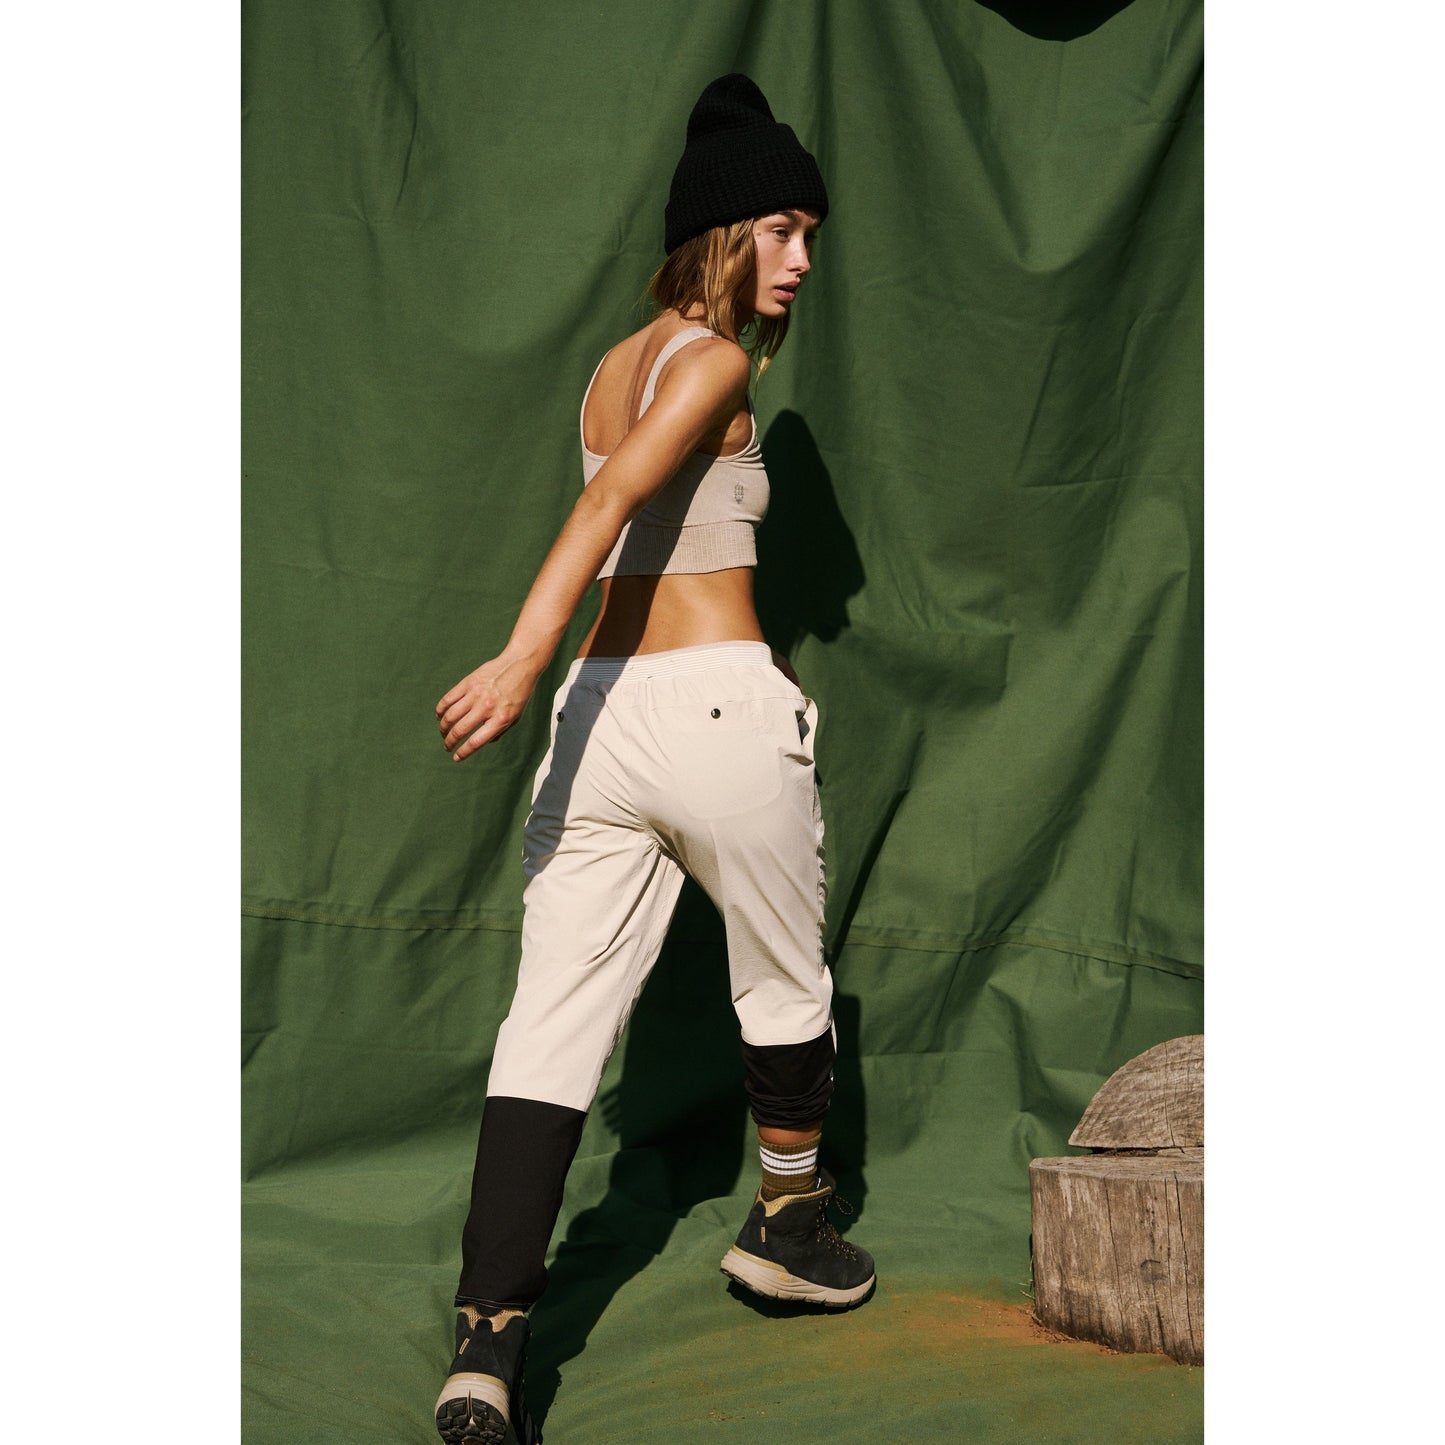 Young woman in Free People Movement's Cascade Jogger in Muted Beige and beanie hat posing against a green backdrop.